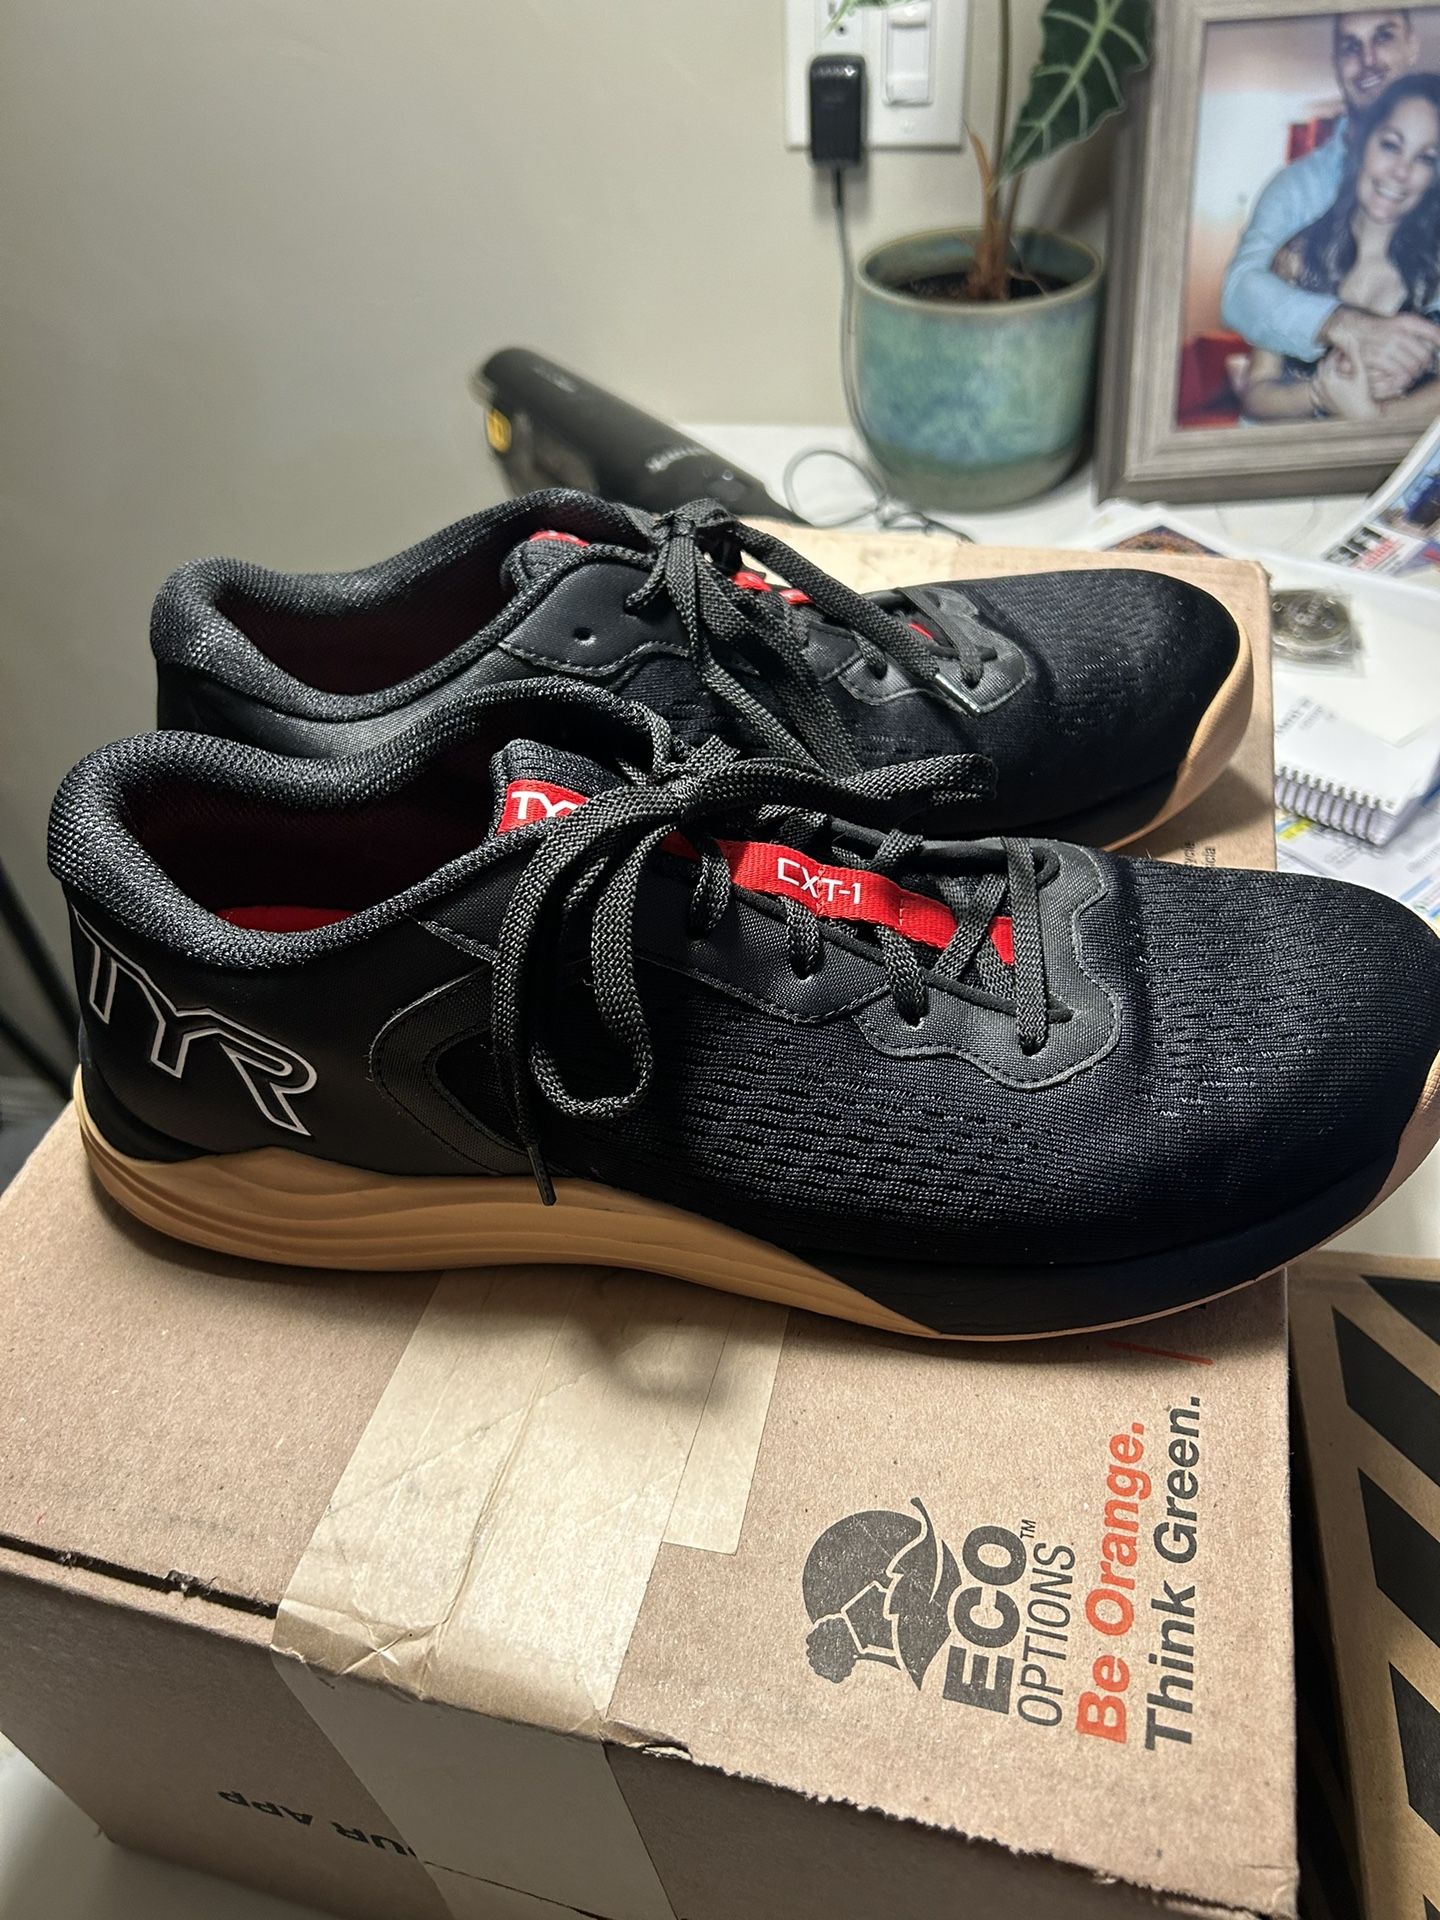 TYR CXT-1 Trainers, size 13. 